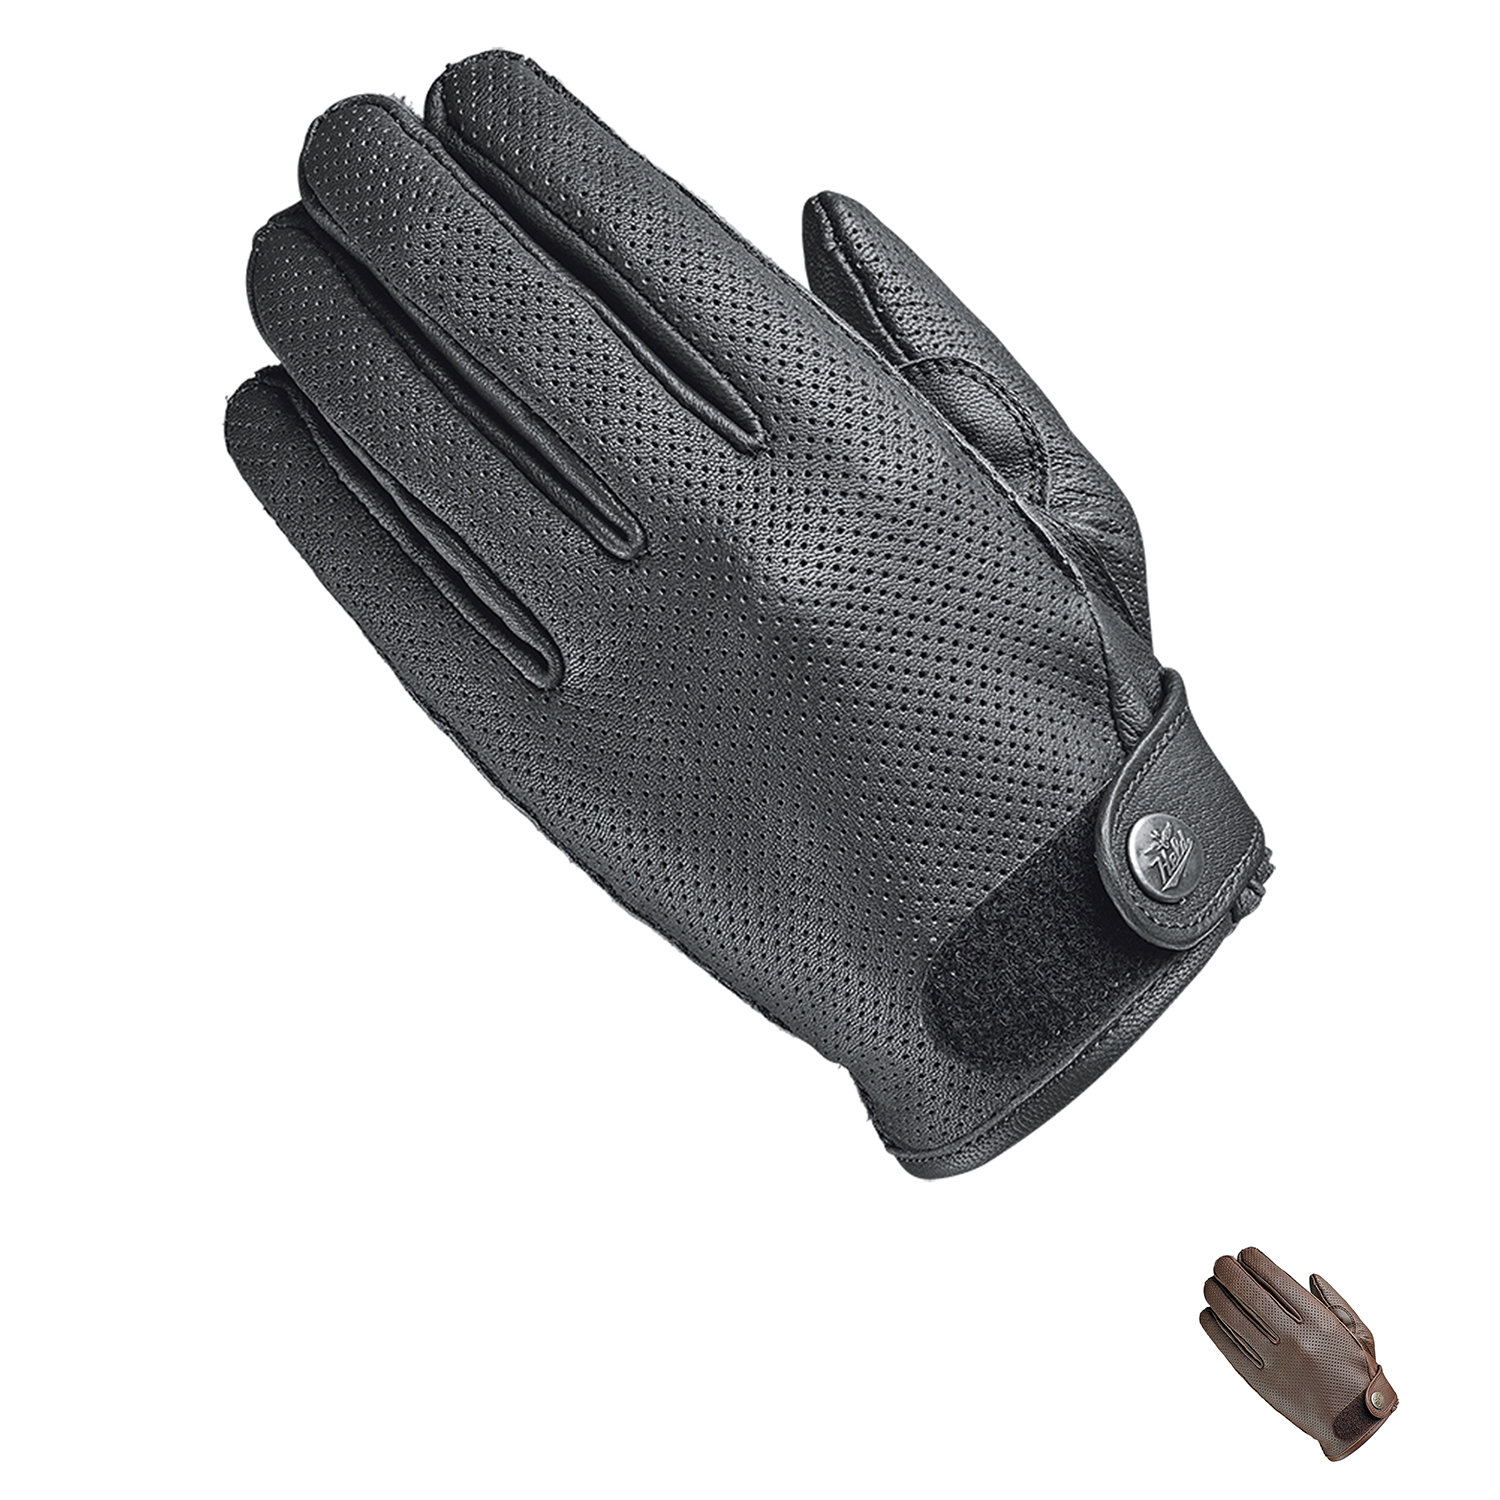 Held Airea Summer Gloves - Available in Various Sizes